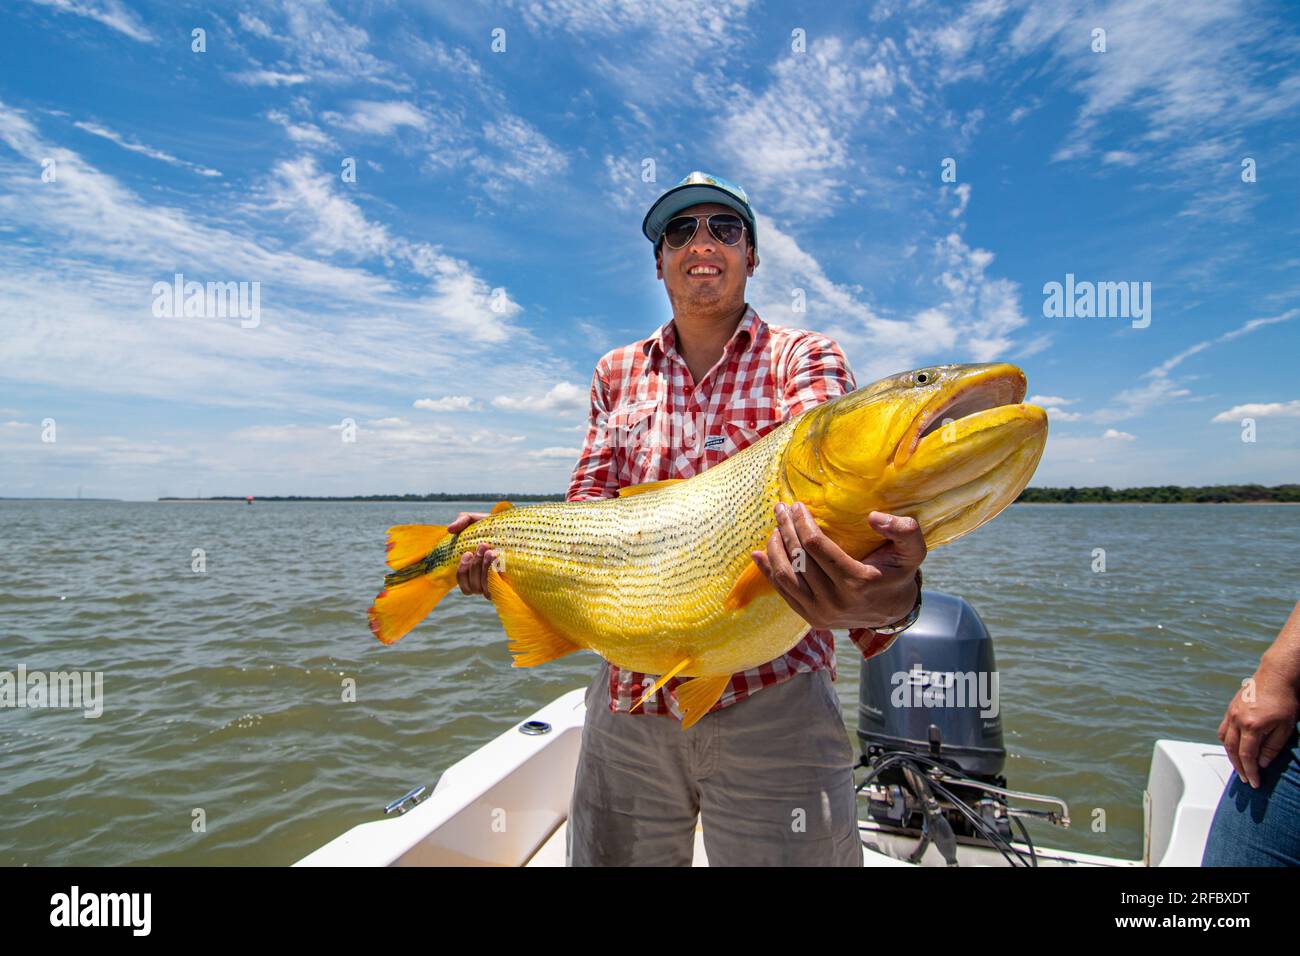 Grown white man holding a big specimen of golden dorado (Salminus Brasiliensis) after a catch and return fishing routine. Stock Photo